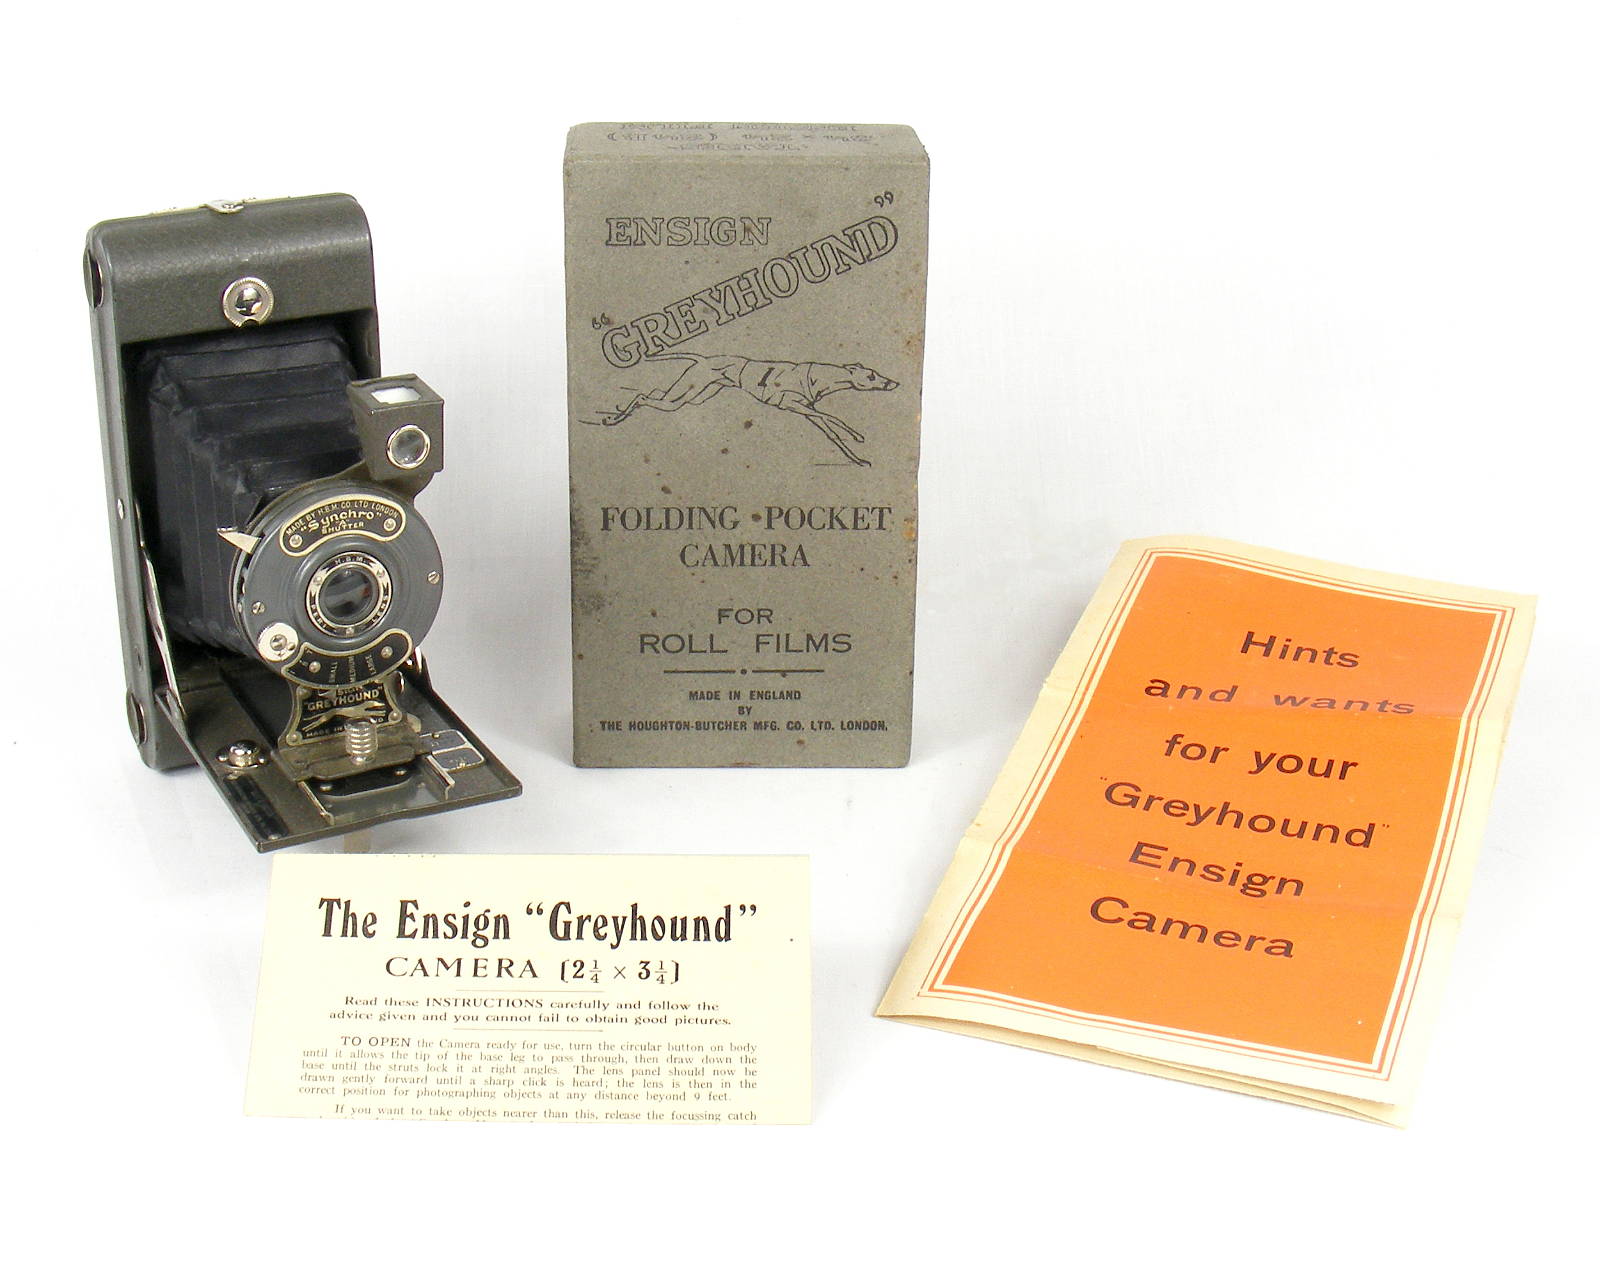 Image of the Ensign Greyhound camera, box and paperwork